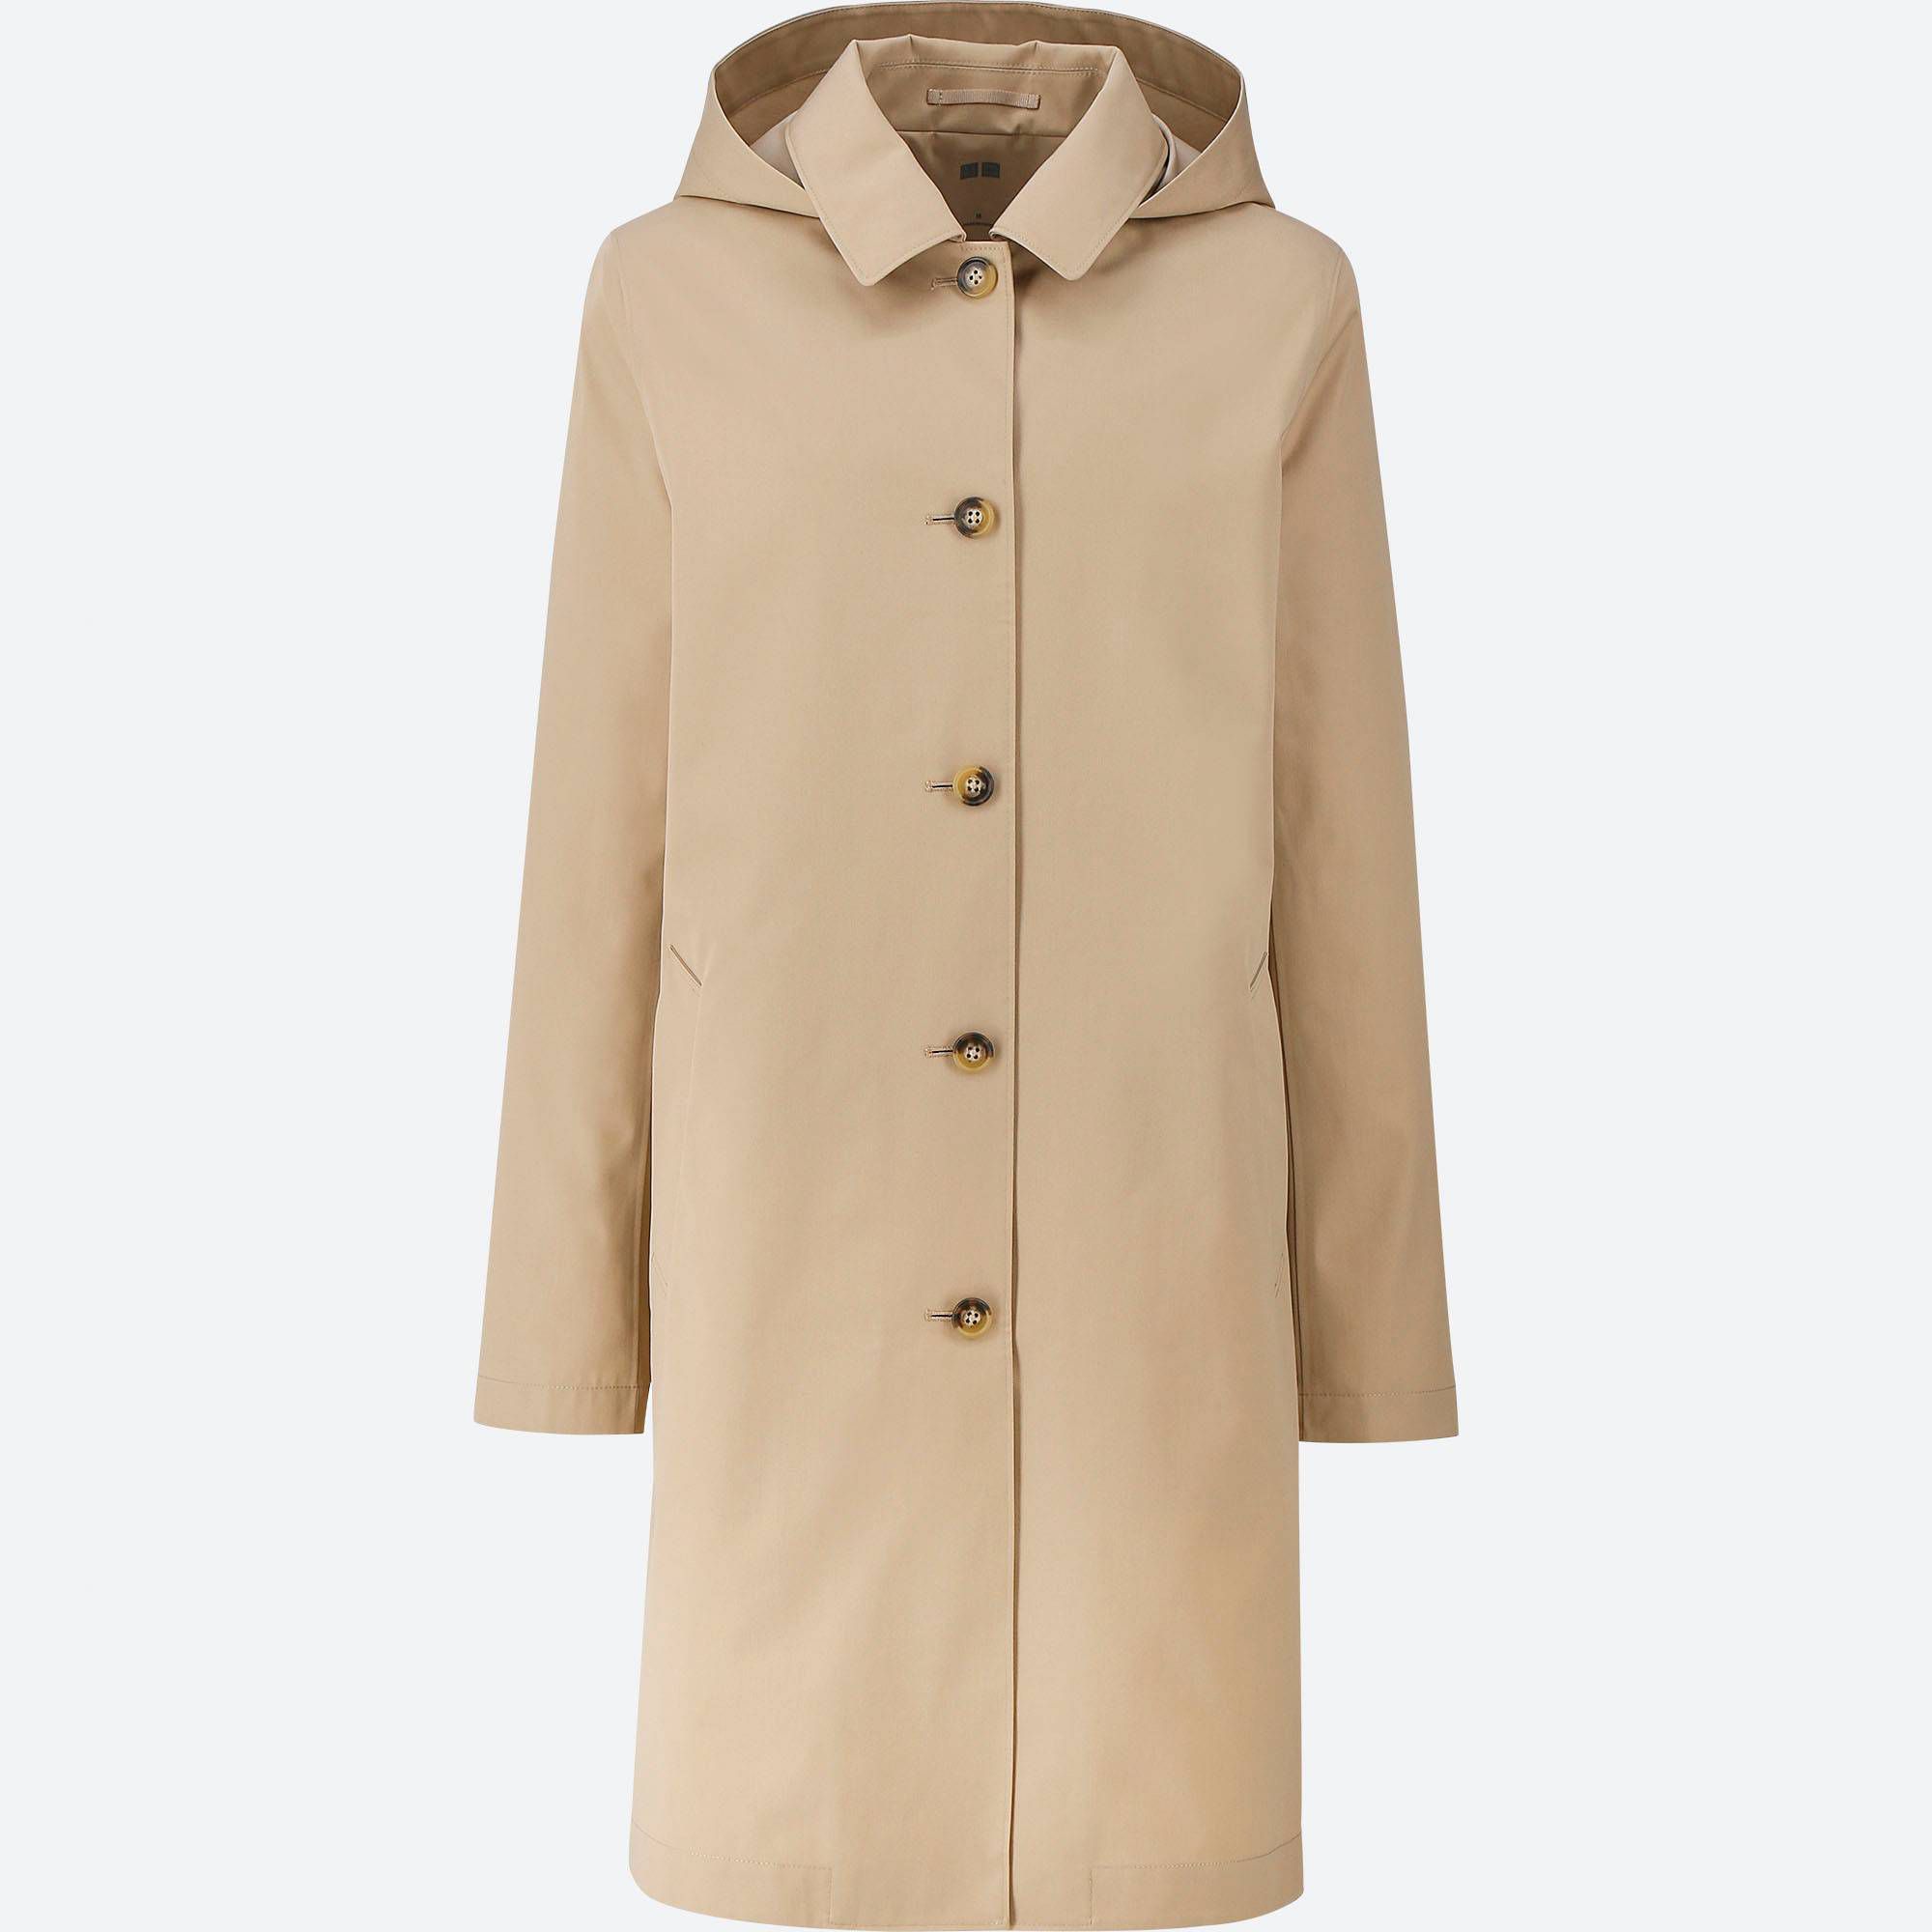 This $60 Uniqlo Coat Looks Just as Good as a Designer One